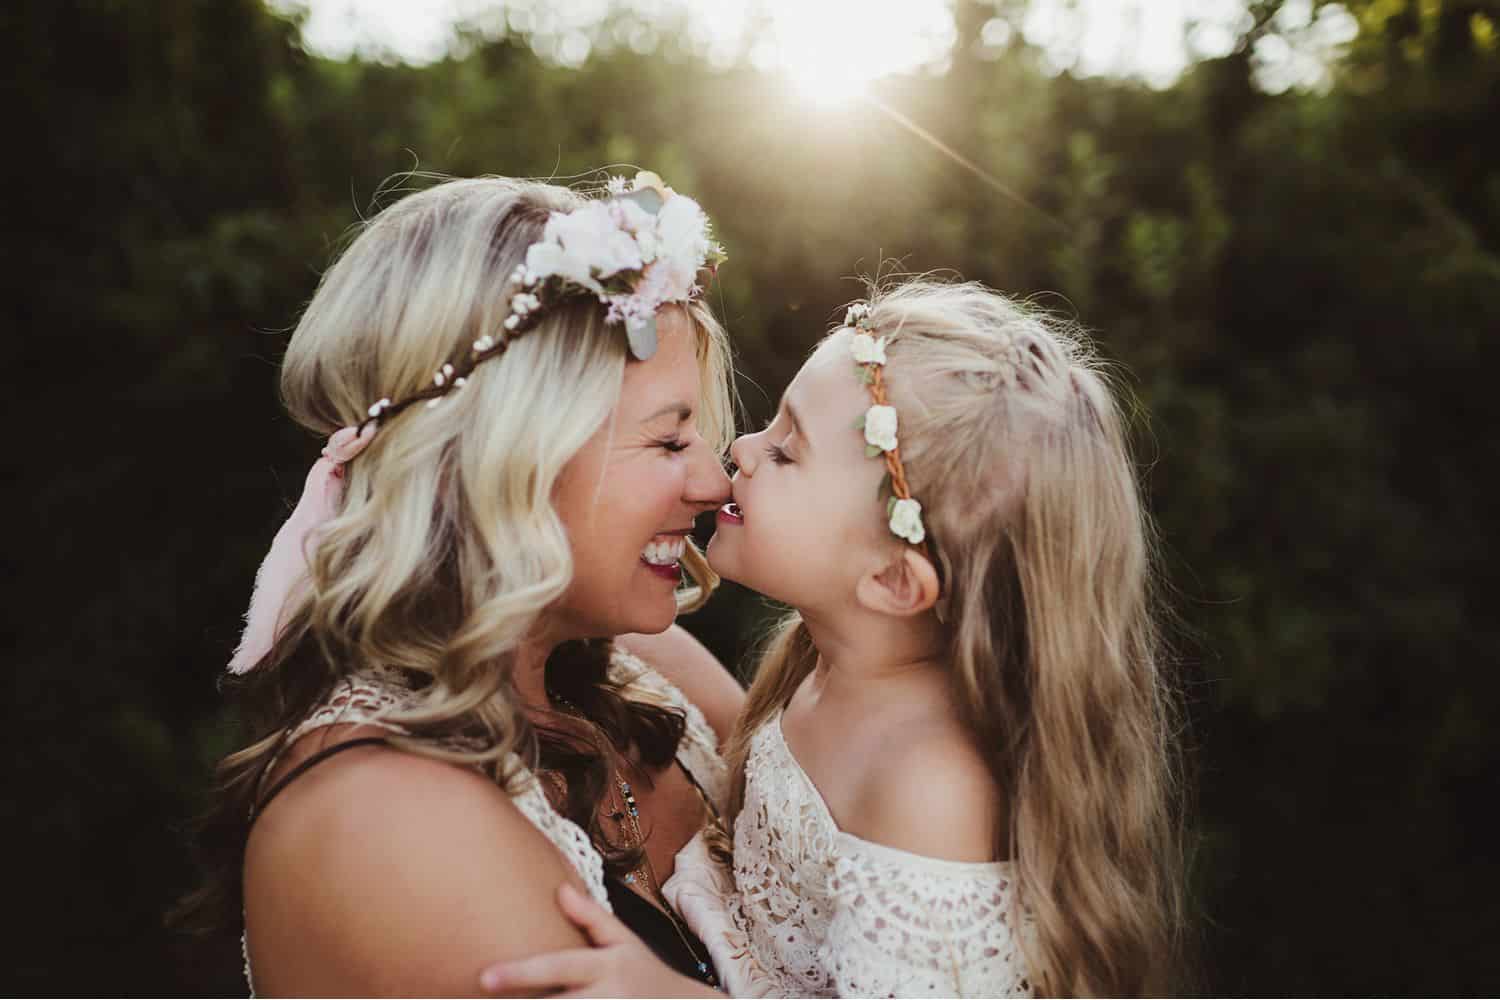 mother and daughter rub noses wearing white lace dresses